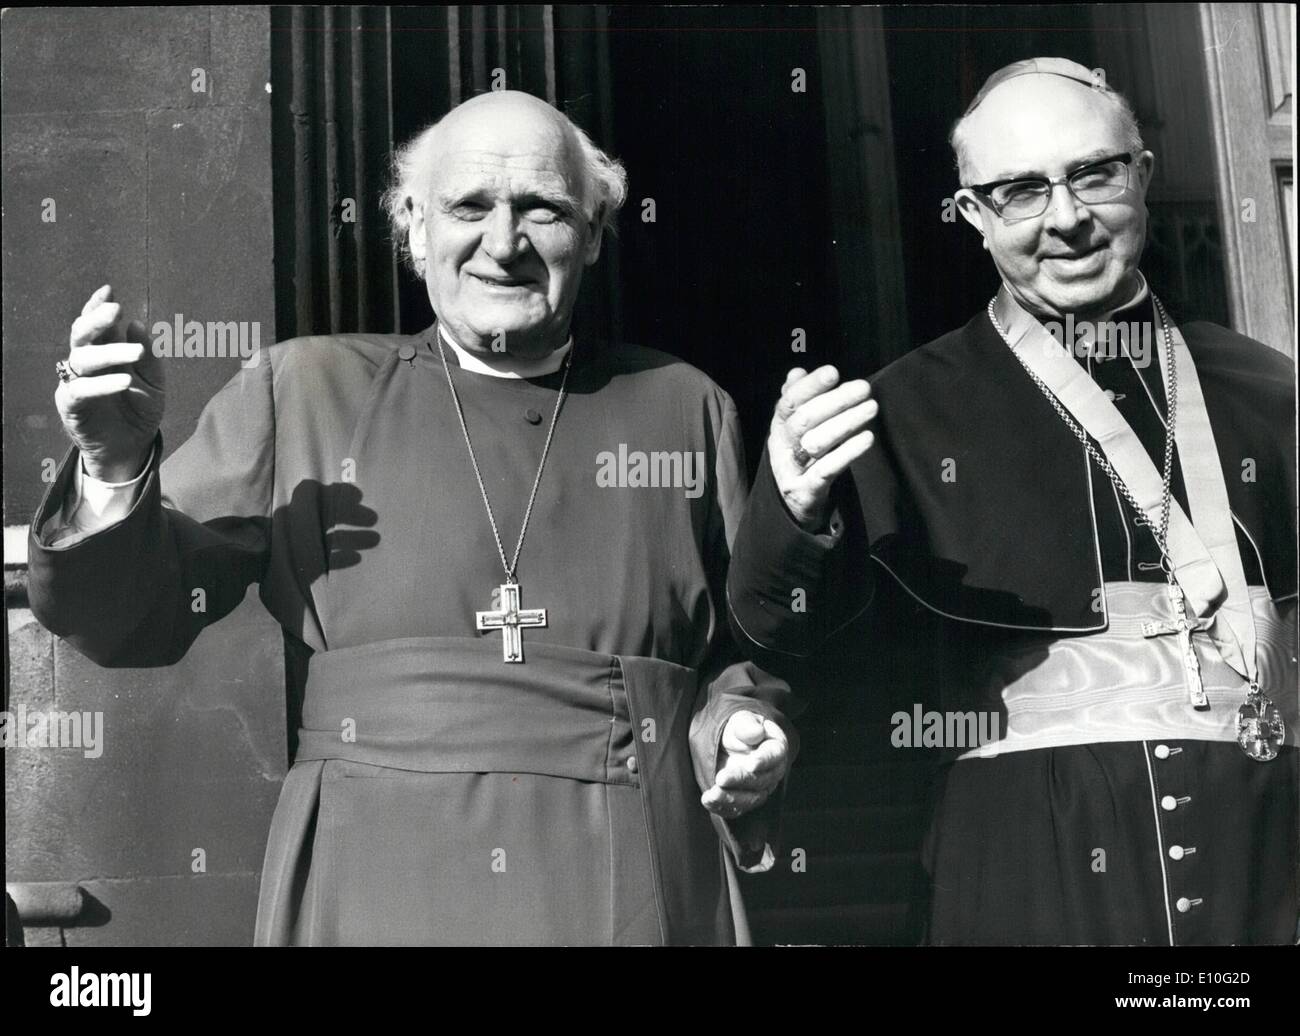 Oct. 10, 1972 - Cardinal Willebrands is guest of archbishop of Canterbury. Cardinal Jan Willebrands, president of the Vatican secretariat for promoting christian unity, has arrived in London and will be the guest for three days of the archbishop of Canterbury, Dr Ramsey, at lambeth palace. Tomorrow, the Cardinal will be the first Roman catholic since the reformation to celebrate mass in lambeth palace chapel, which he will do in the presence of Dr. Ramsey. photo shows The archbishop of Canterbury (Dr. Ramsey), on left), pictured with Cardinal Jan willebrands, at lambeth palace today. Stock Photo